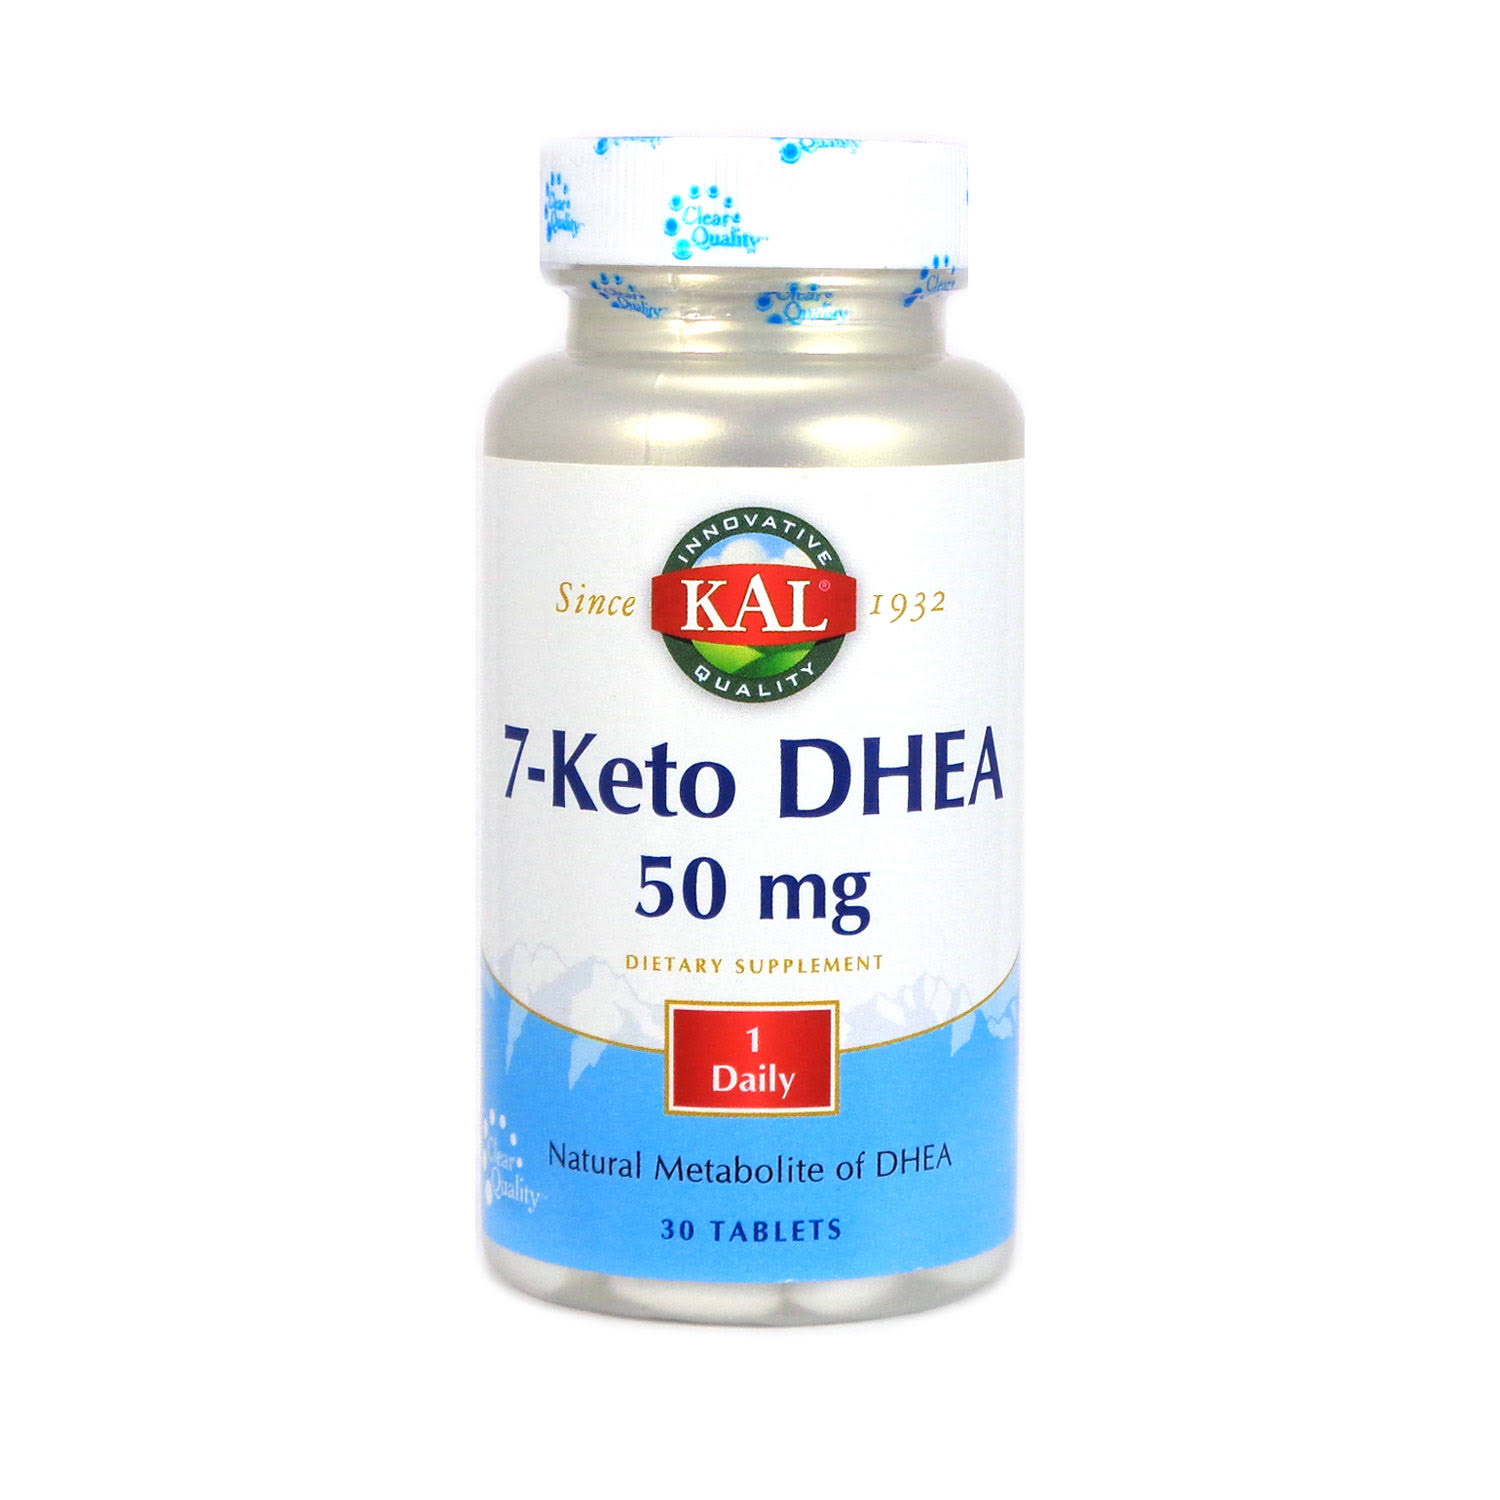 Kal 7-Keto DHEA Dietary Supplement - 50Mg, 30 Tablets